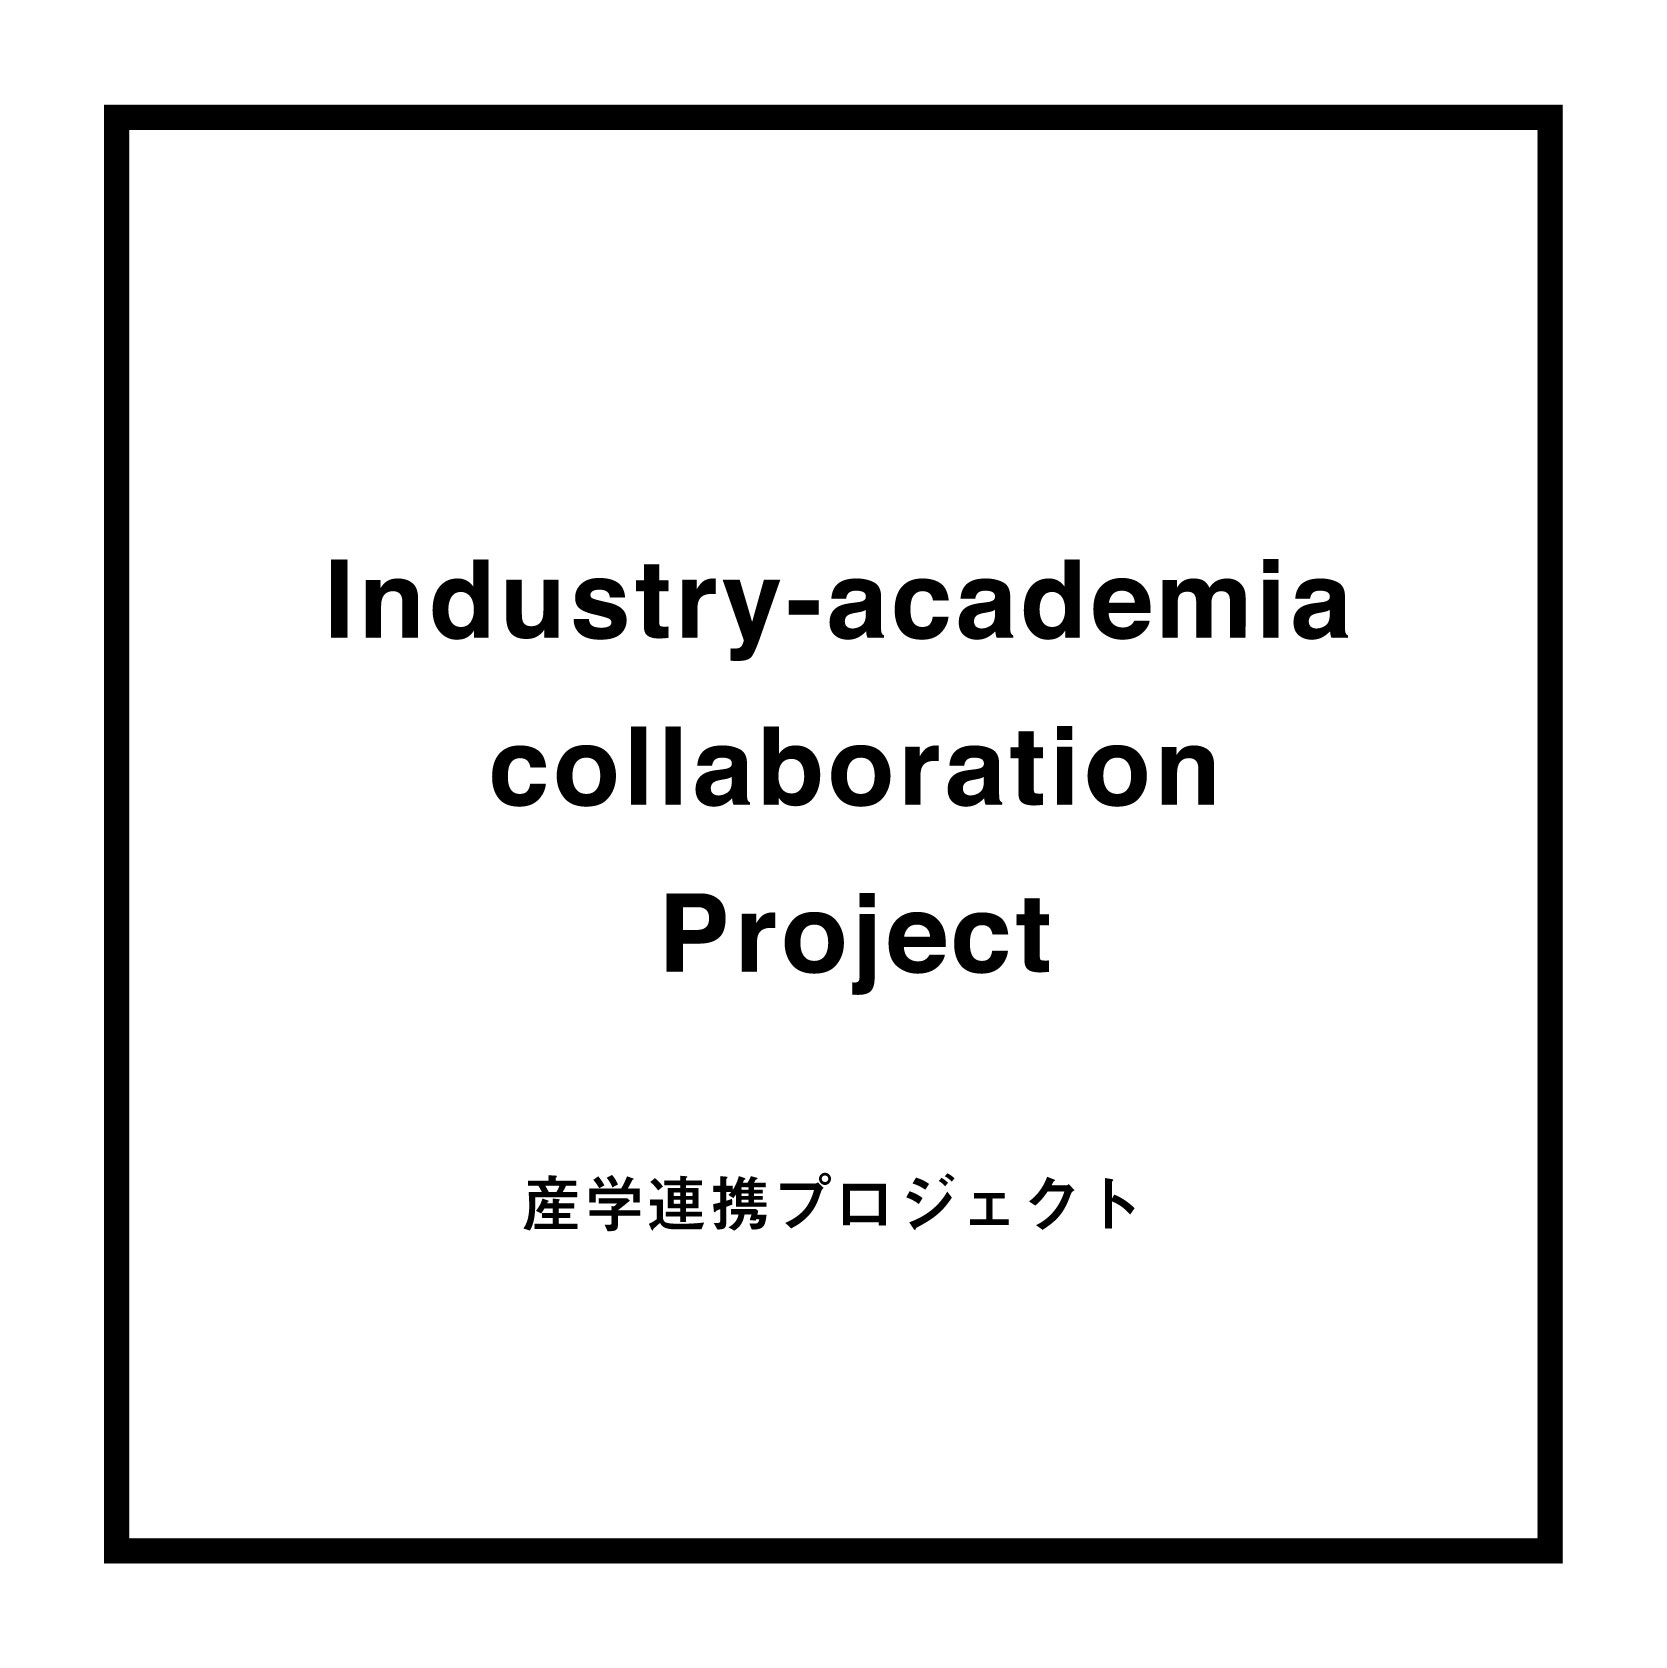 Industry-academia collaboration Project｜産学連携プロジェクト